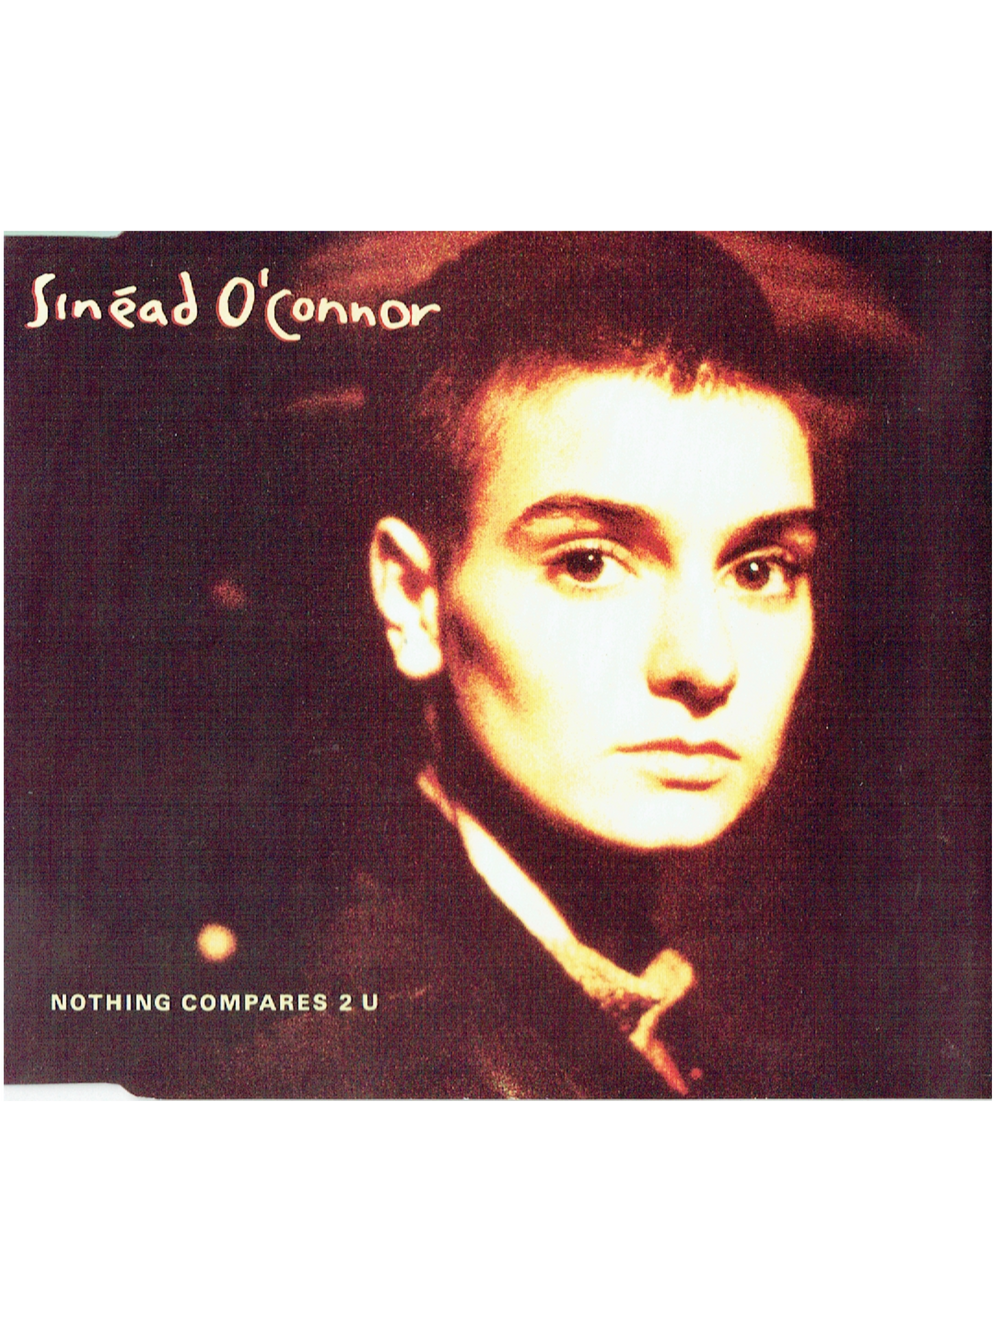 Sinead O'Conner Nothing Compares 2 U EU / UK CD Single 3 Tracks Written By Prince